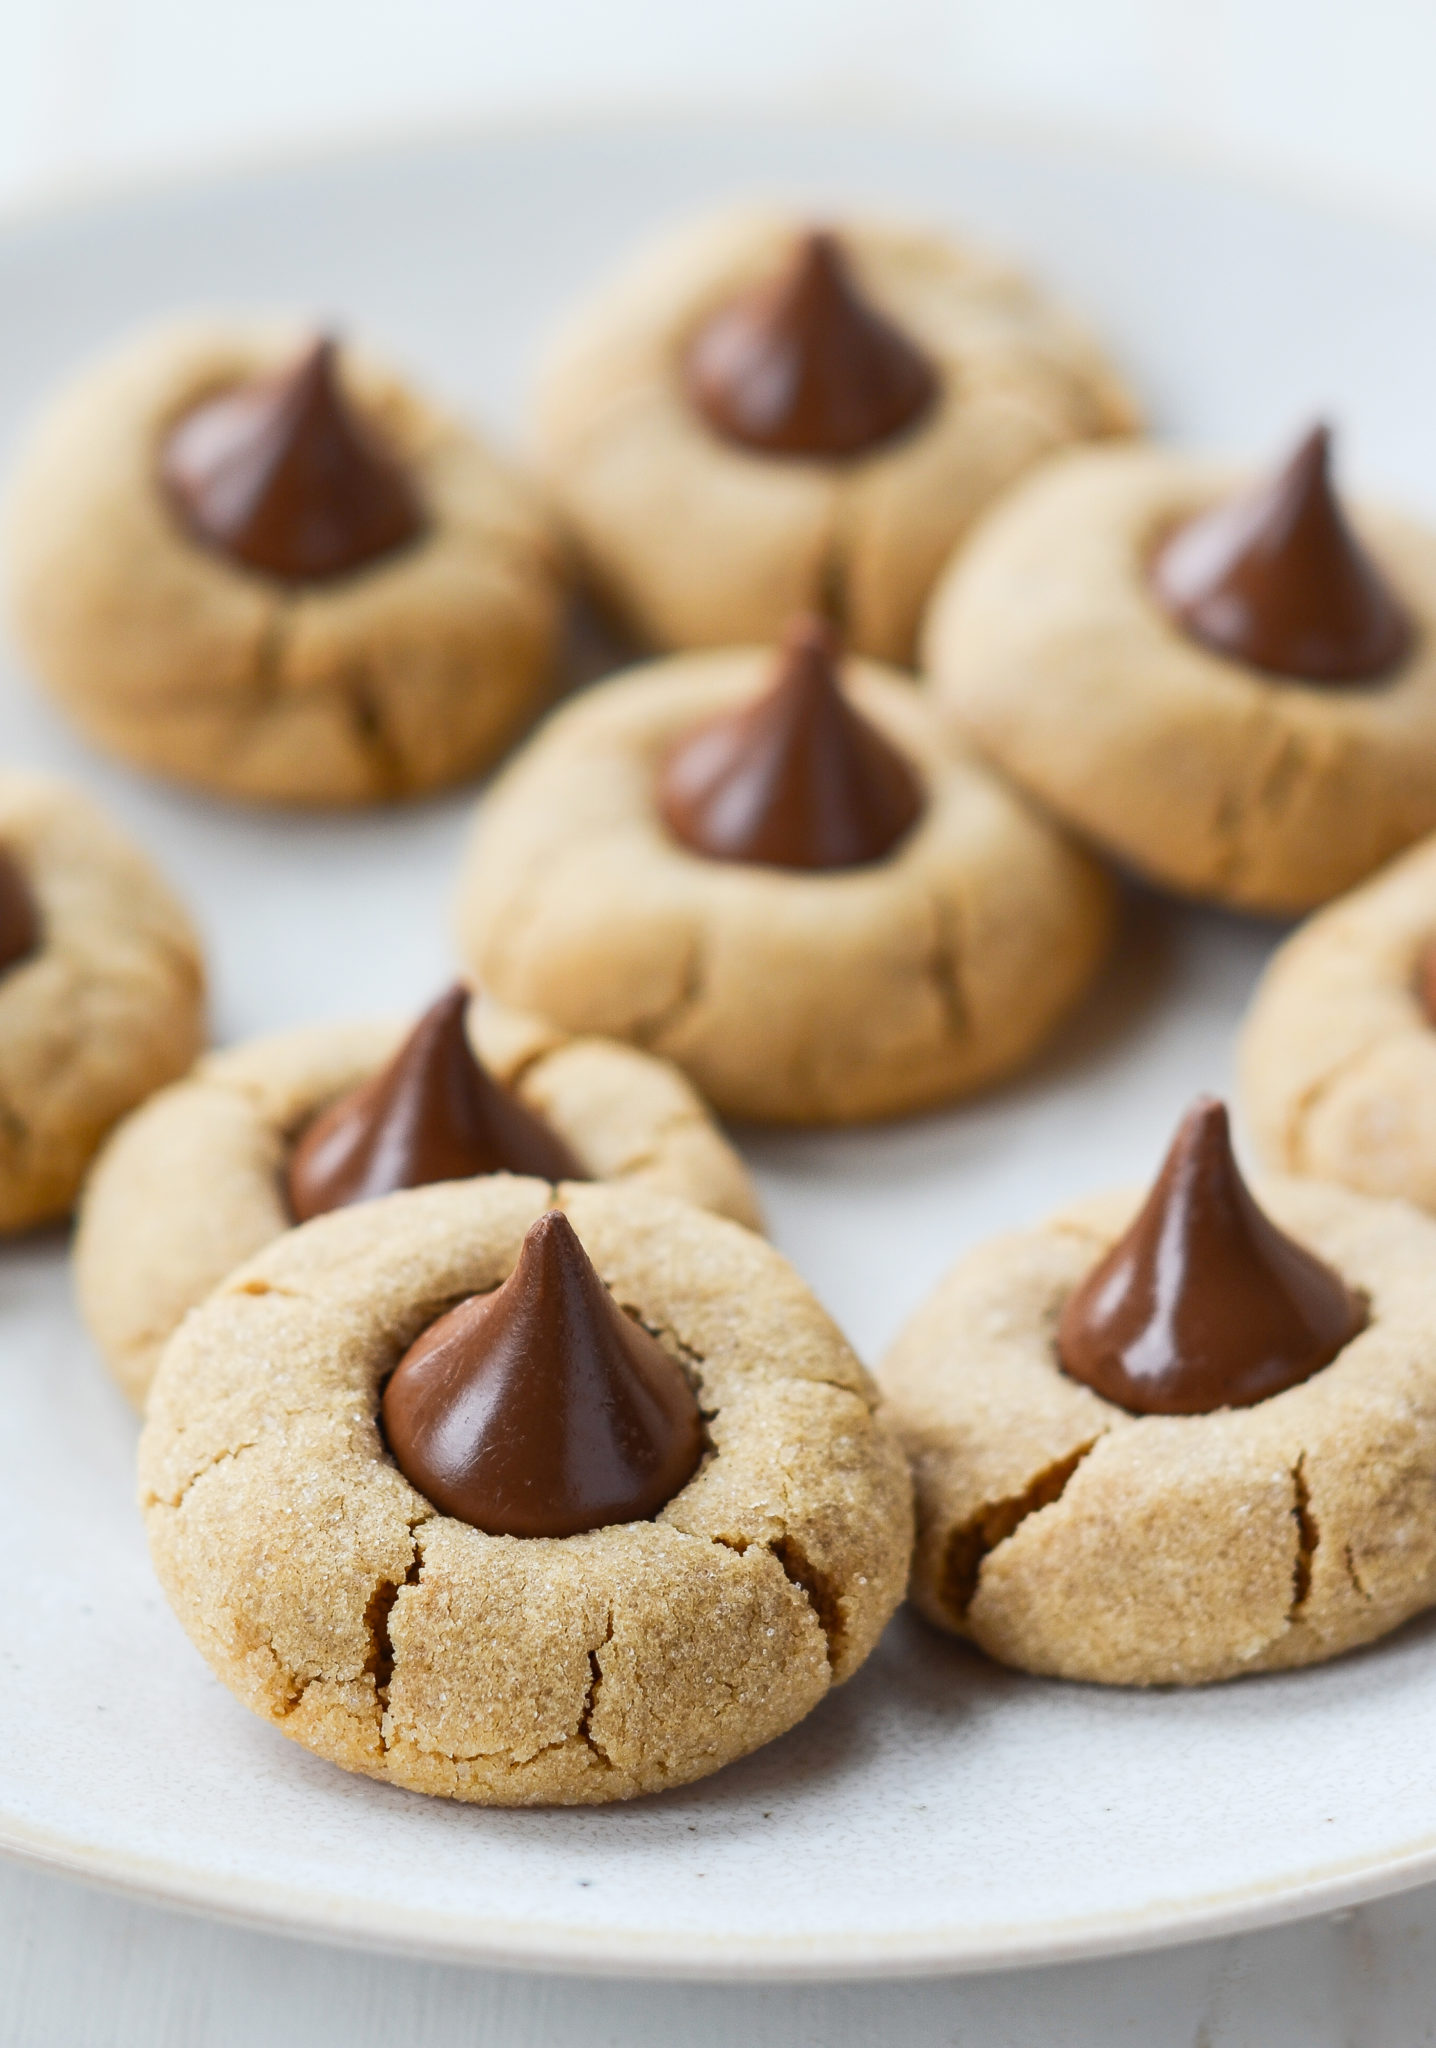 https://www.onceuponachef.com/images/2019/12/Peanut-Butter-Blossoms-scaled.jpg